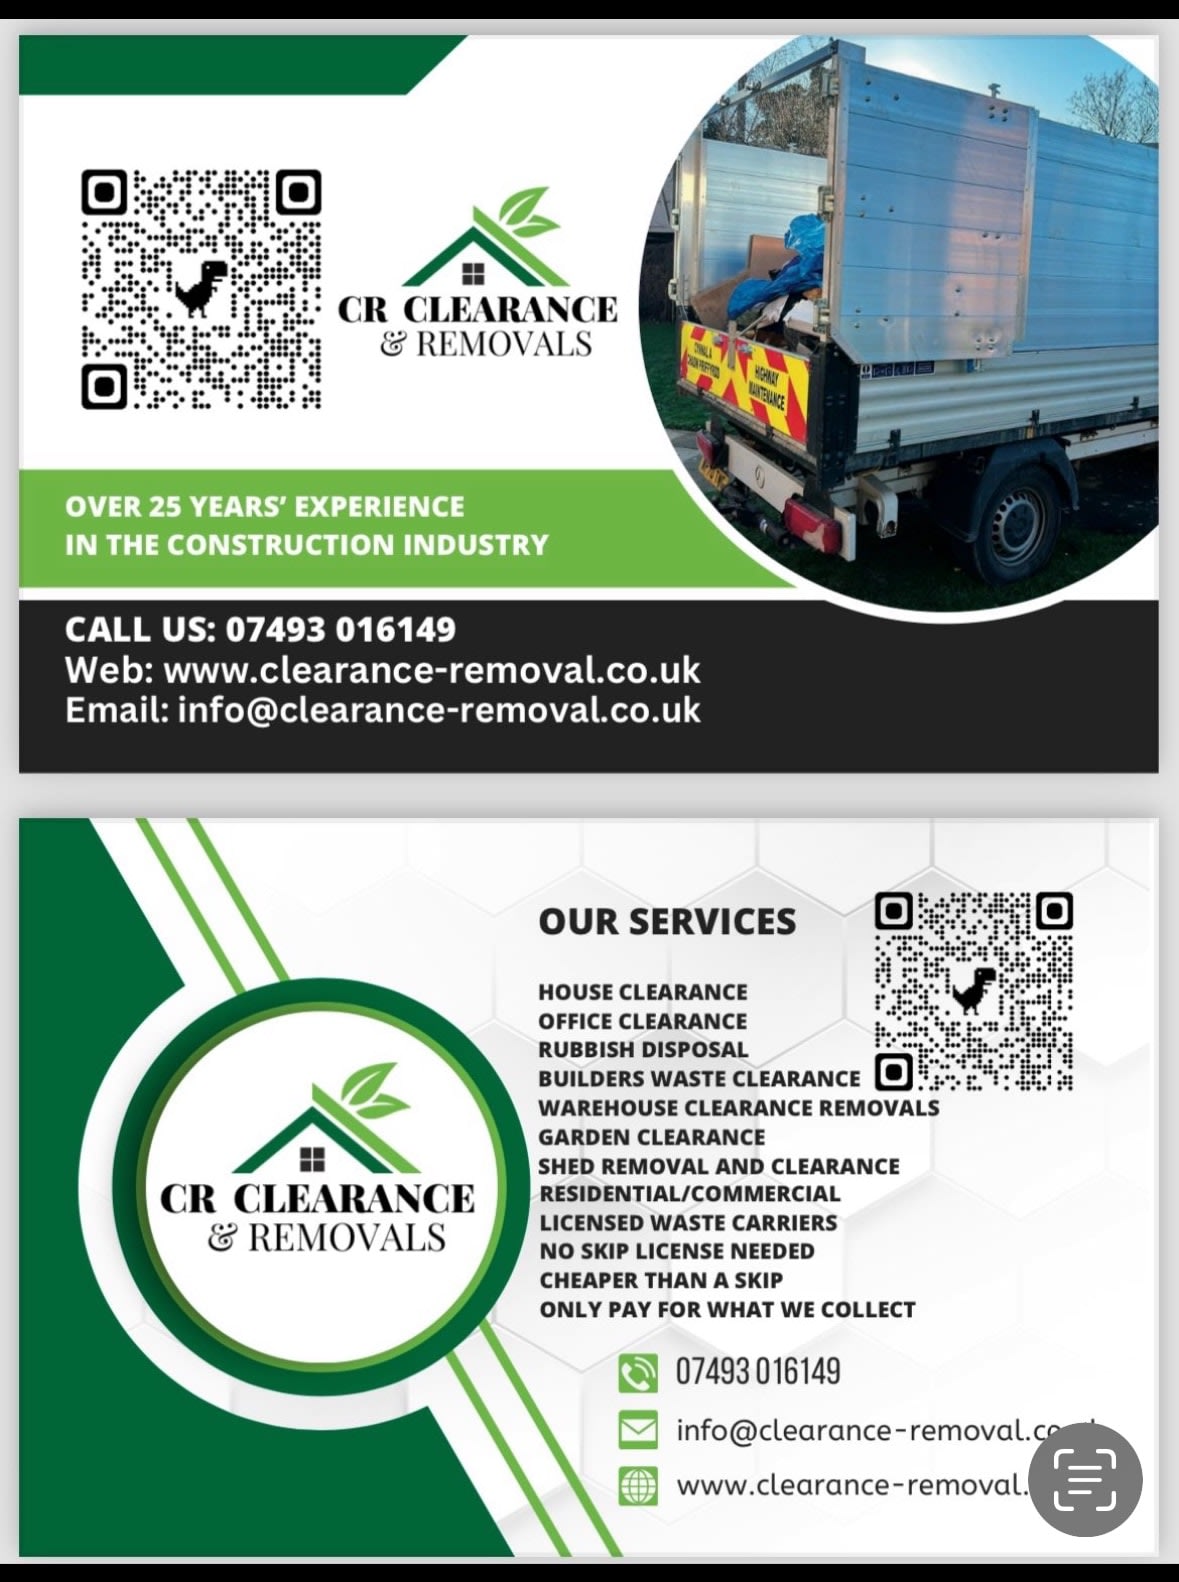 Images CR Clearance & Removals Ltd